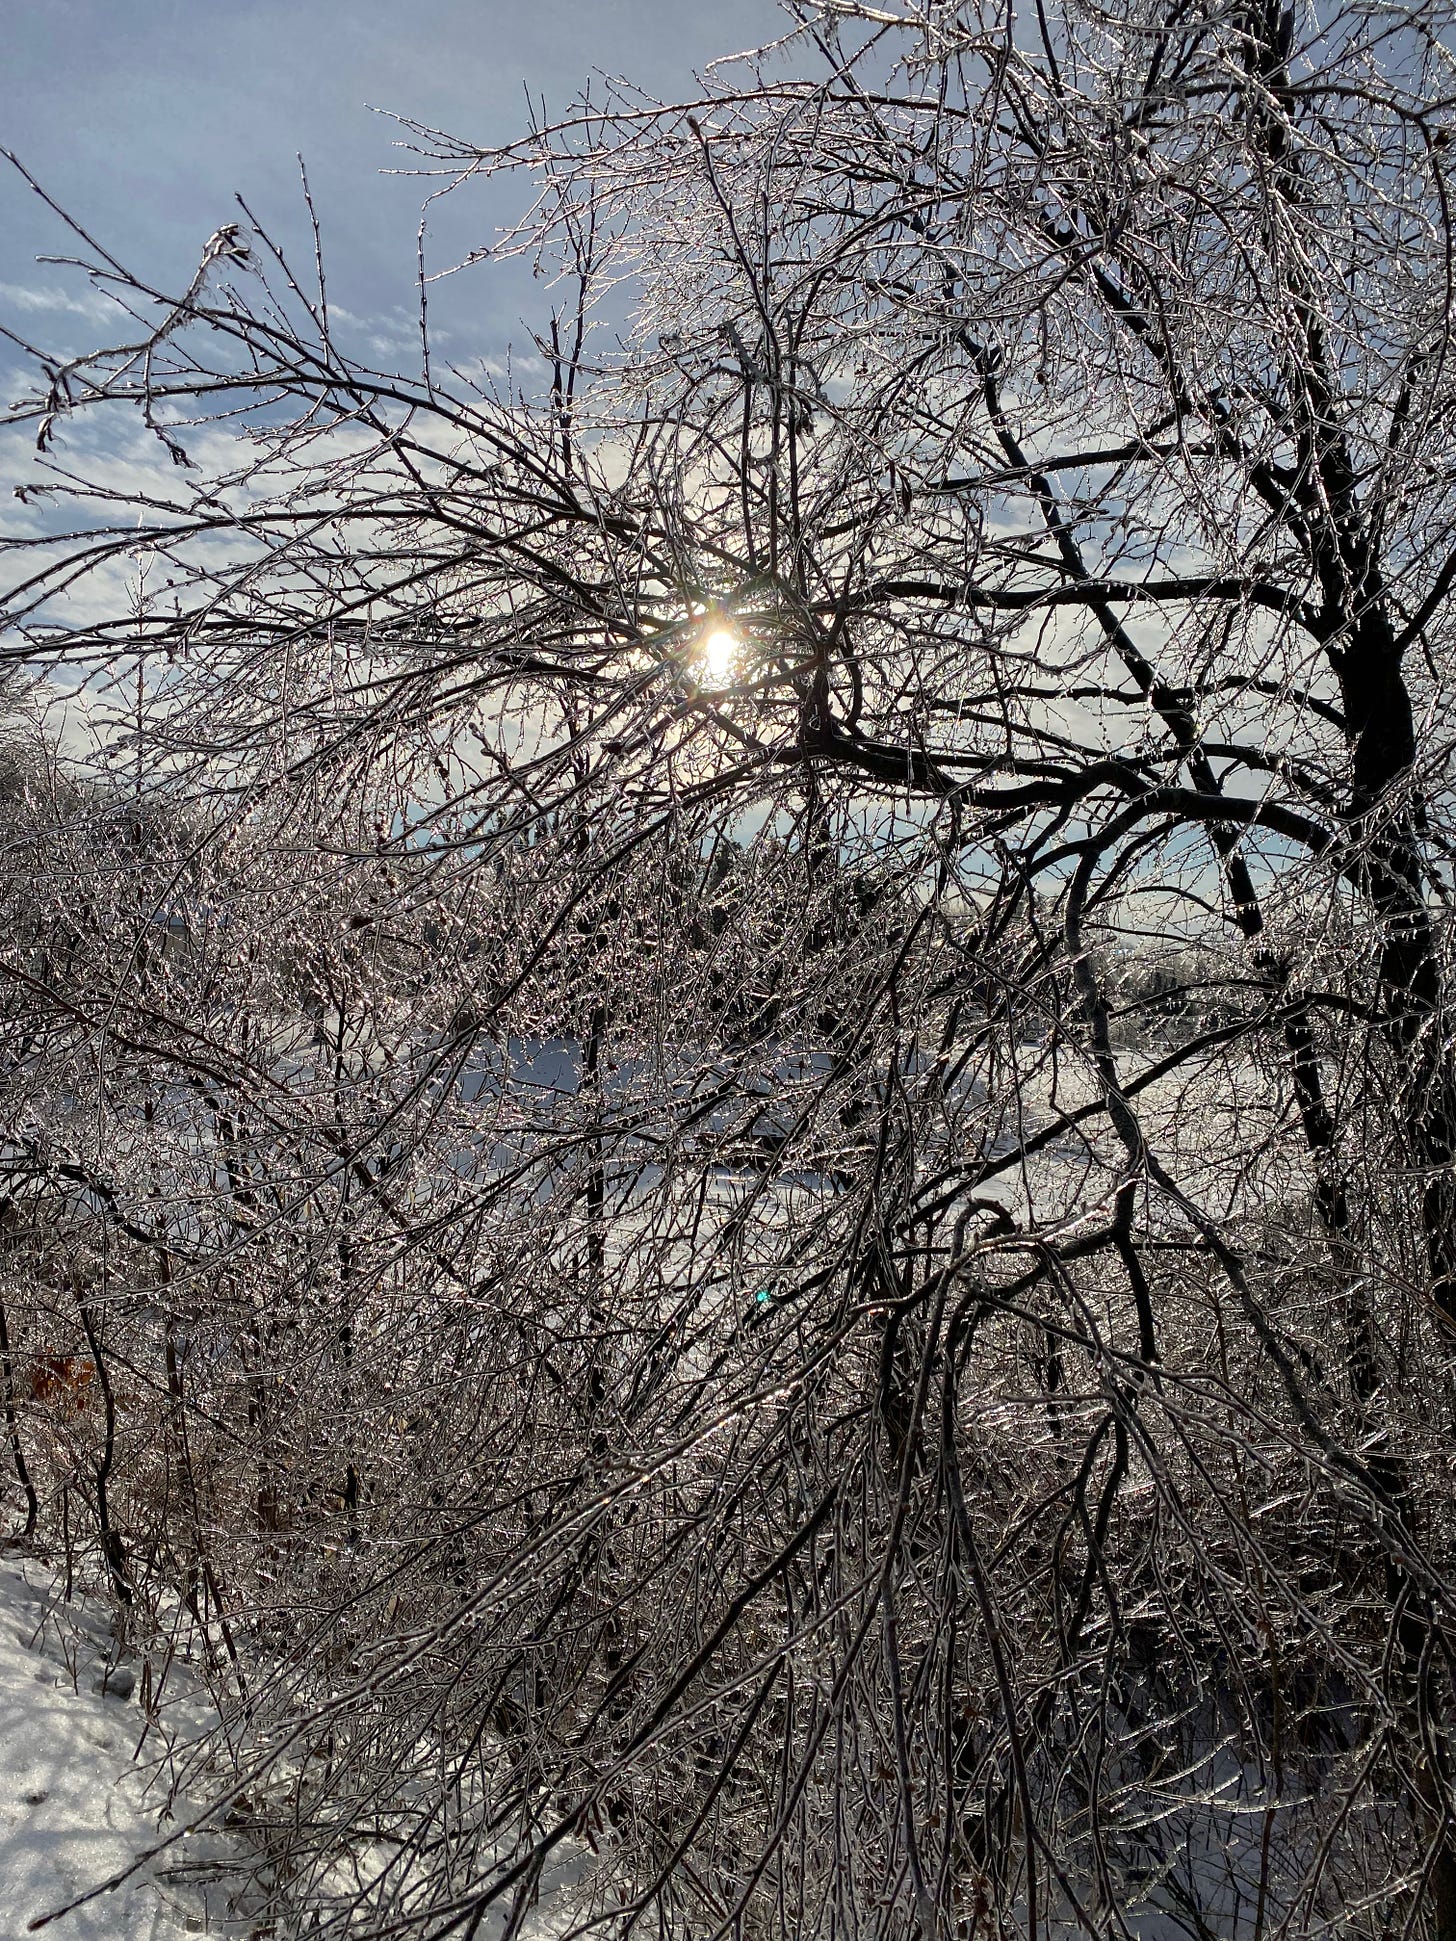 A tangle of bare trees covered in ice, making their branches look like glittering crystals. The sun is visible through the branches of one tree, and it glints off the ice coating the branches.